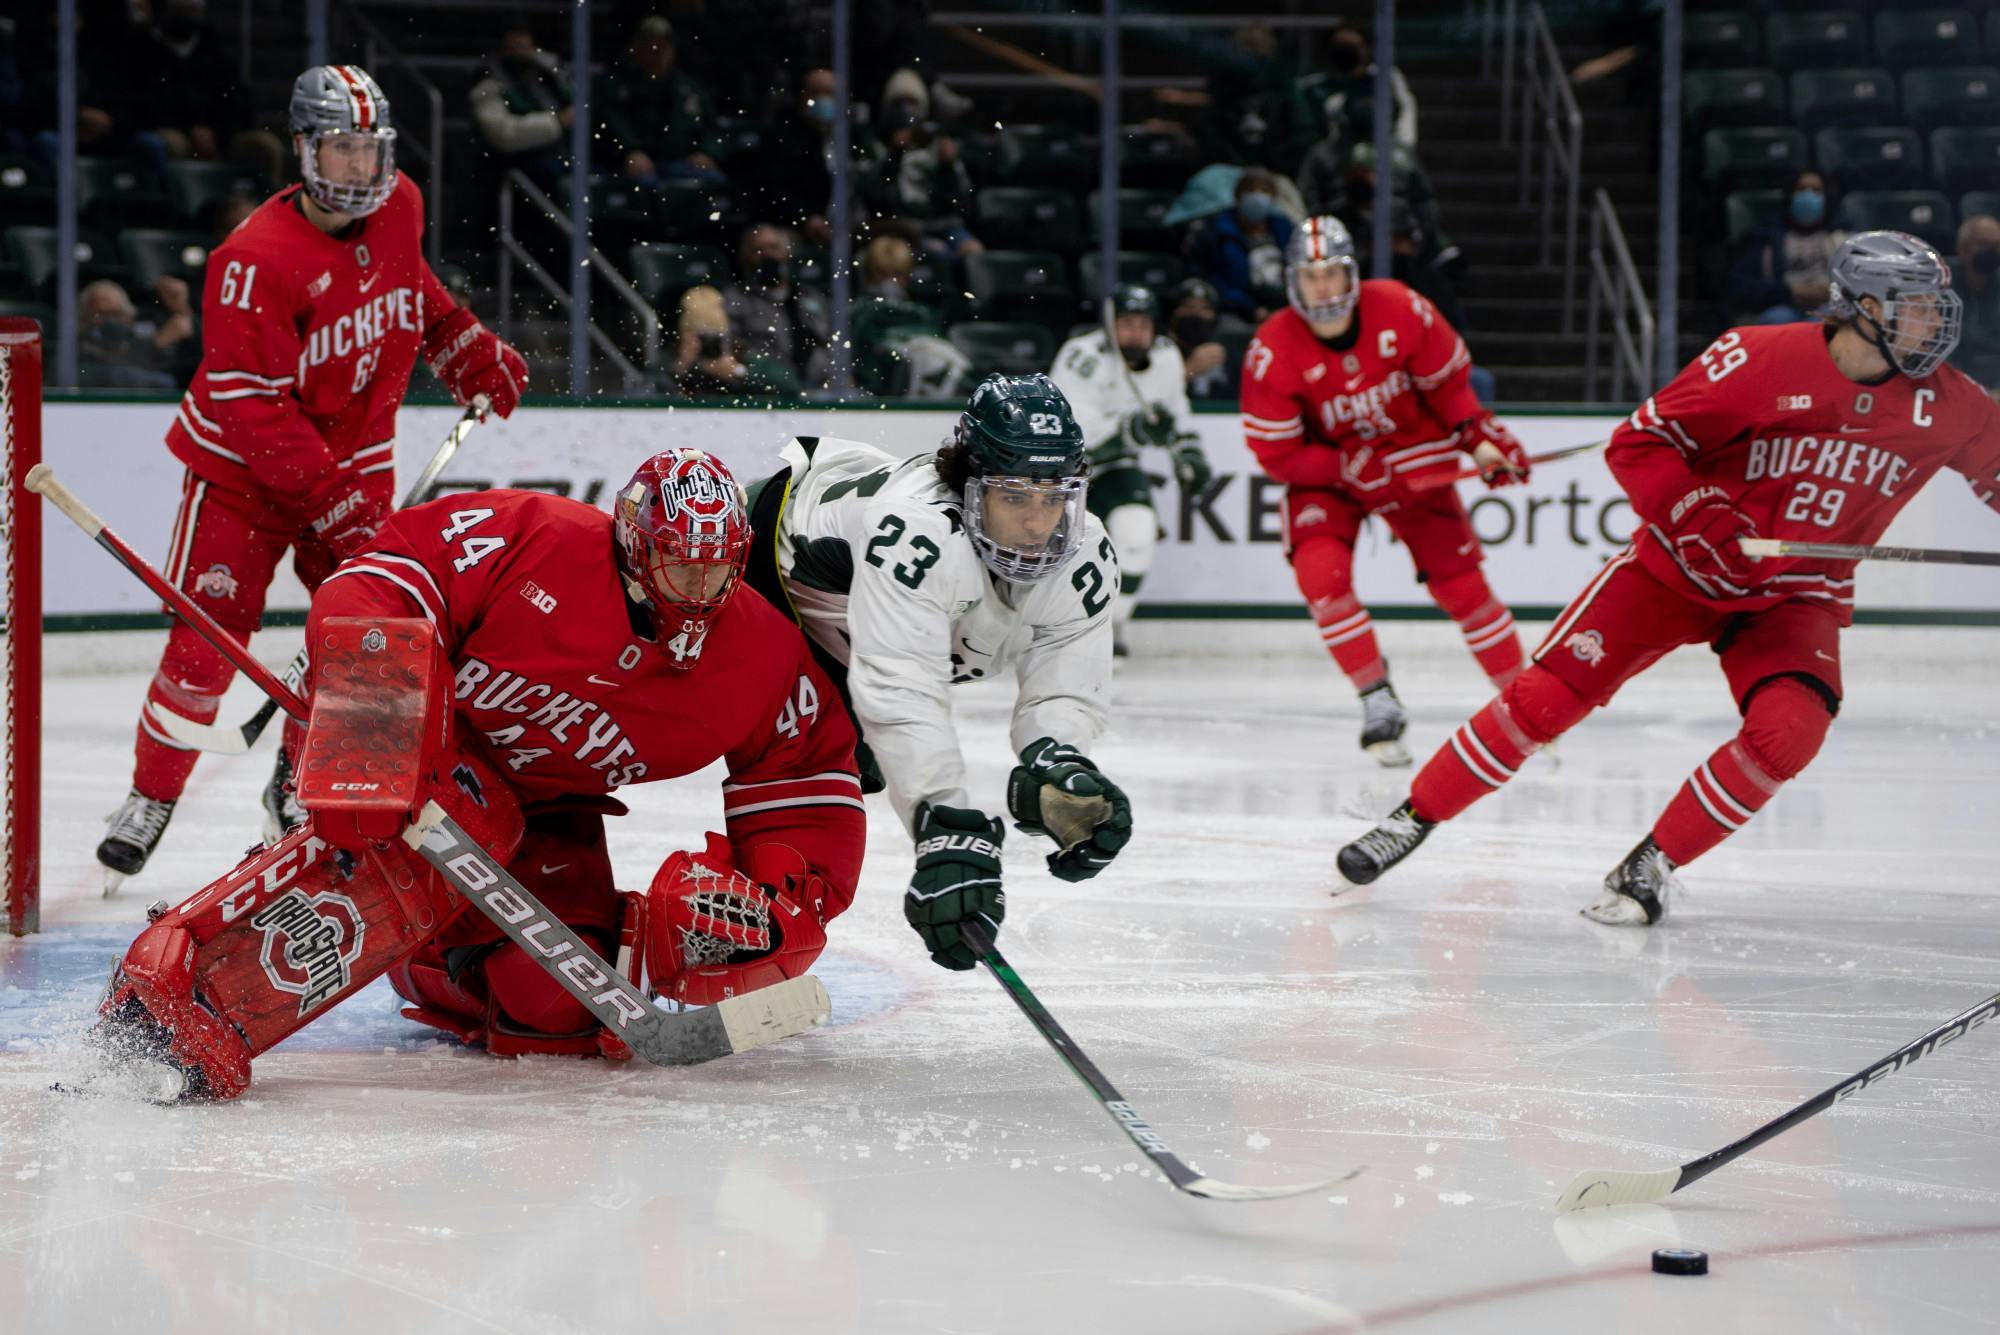 <p>Junior forward Jagger Joshua (23) dives for the puck during the third period. The Spartans fell to the Buckeyes, 4-1, at Munn Ice Arena on Jan. 21, 2022. </p>